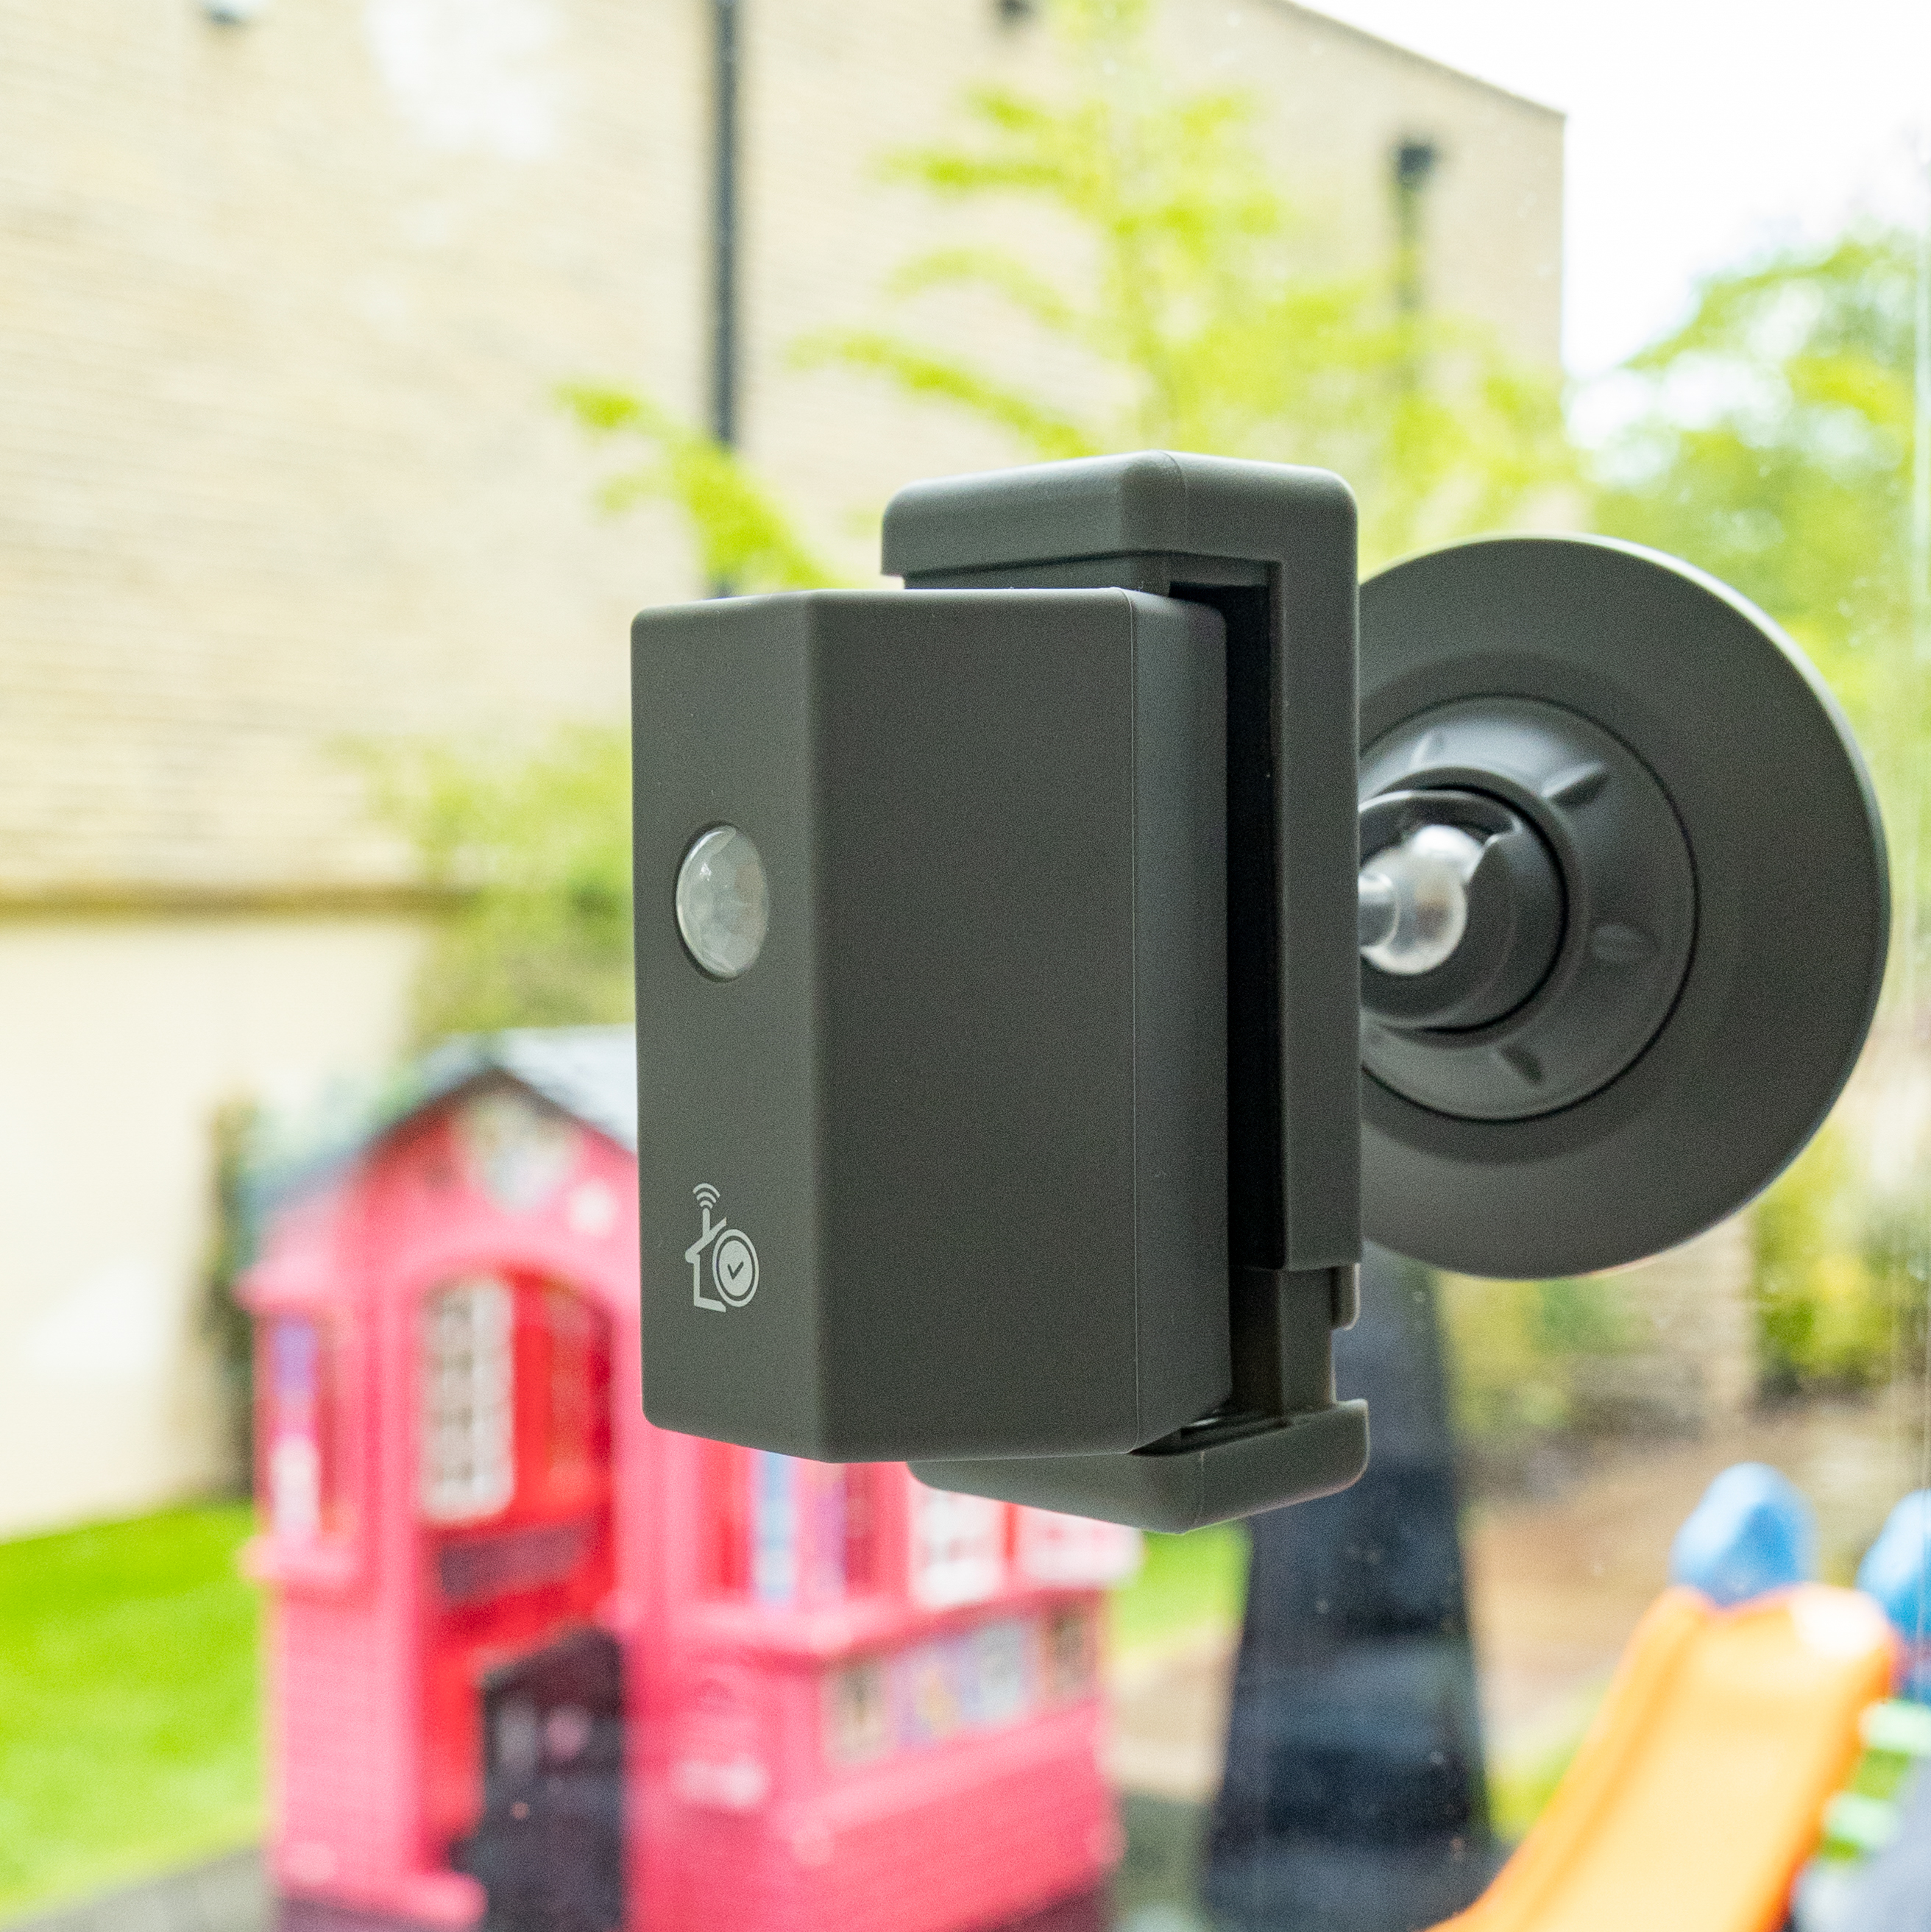 Mounting bracket for the HomeOK outdoor motion